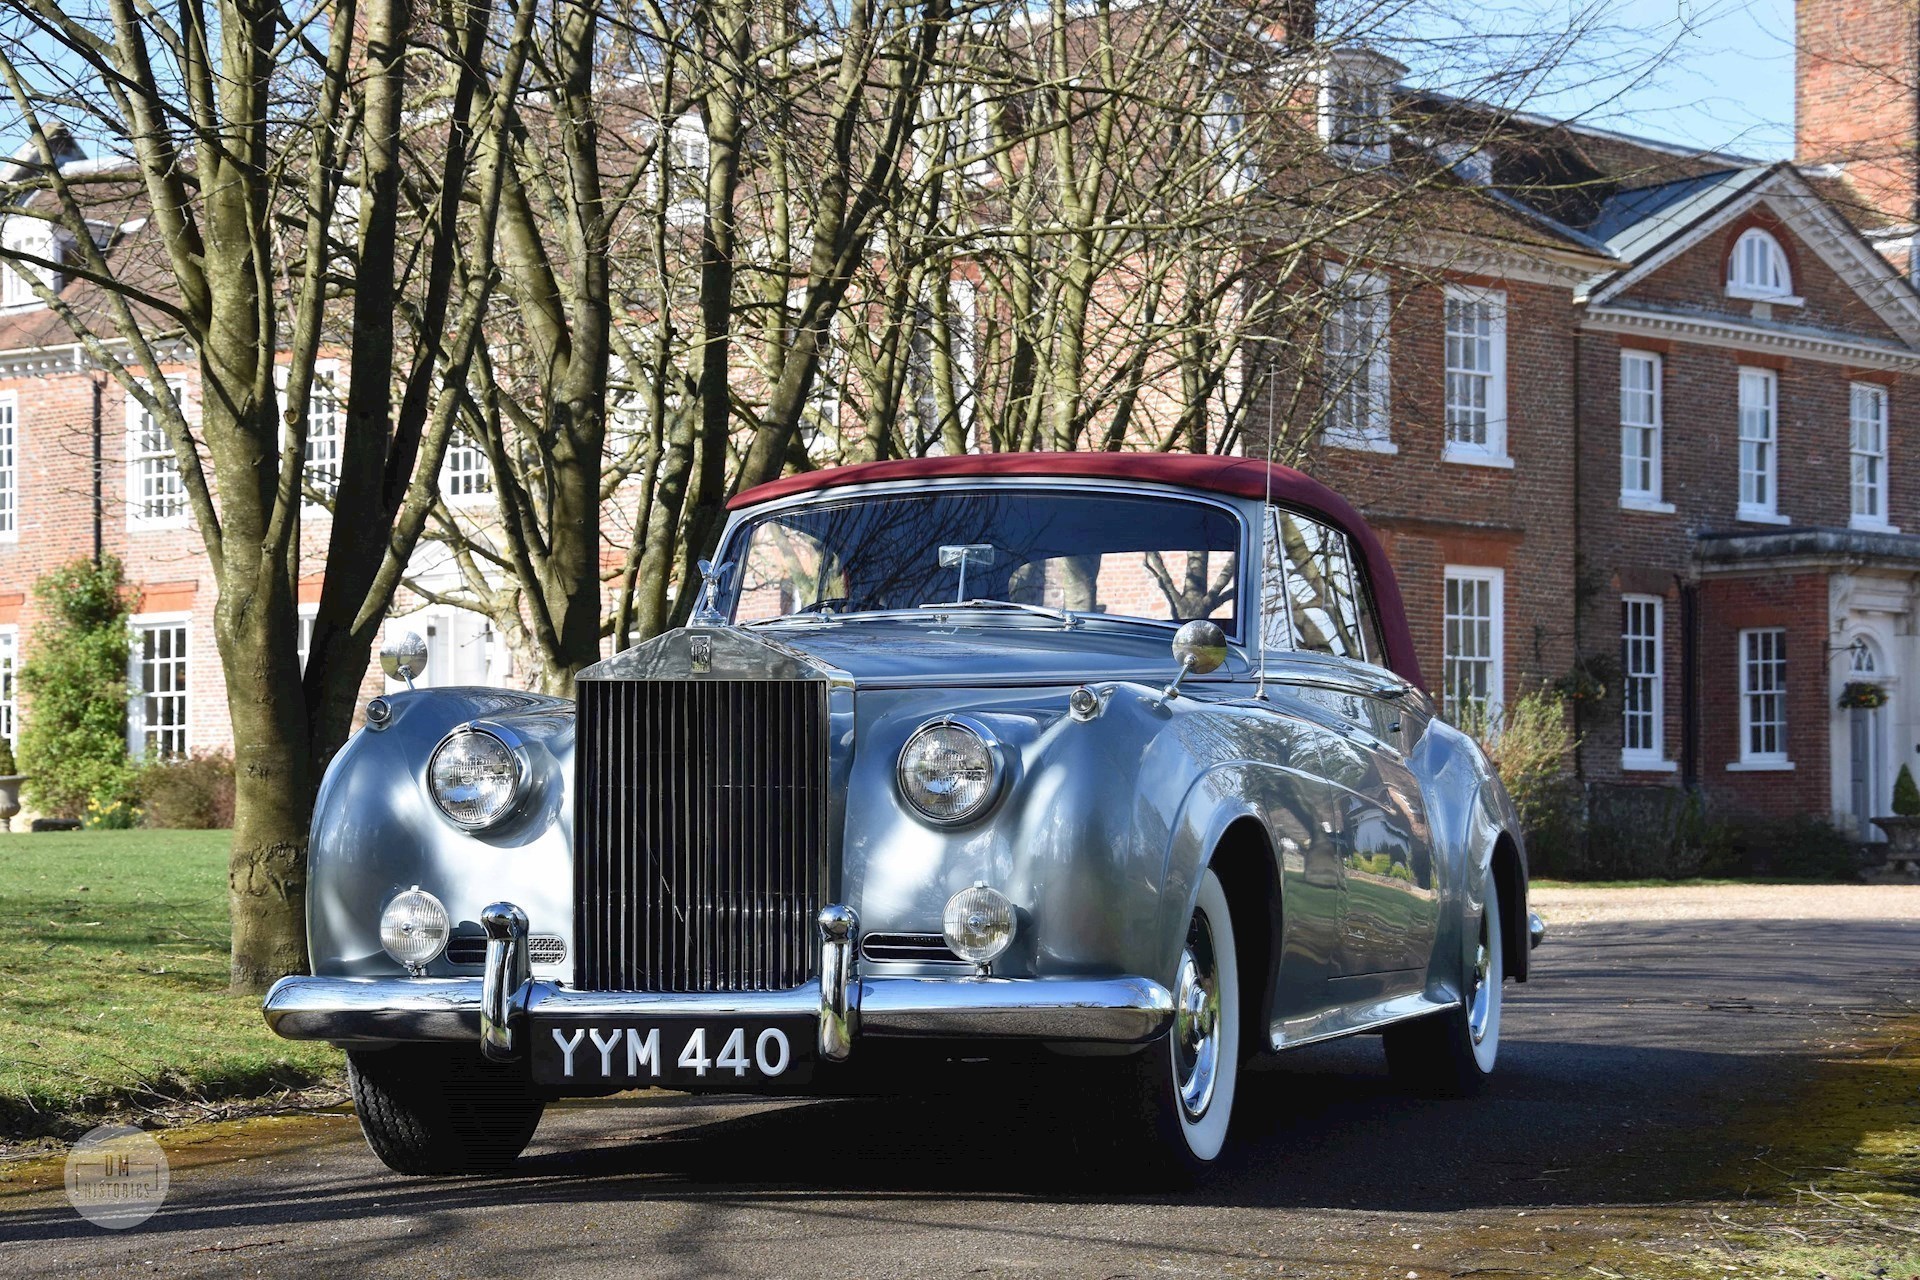 Fully Restored Classic Cars Luxurious Rolls Royce for Sale